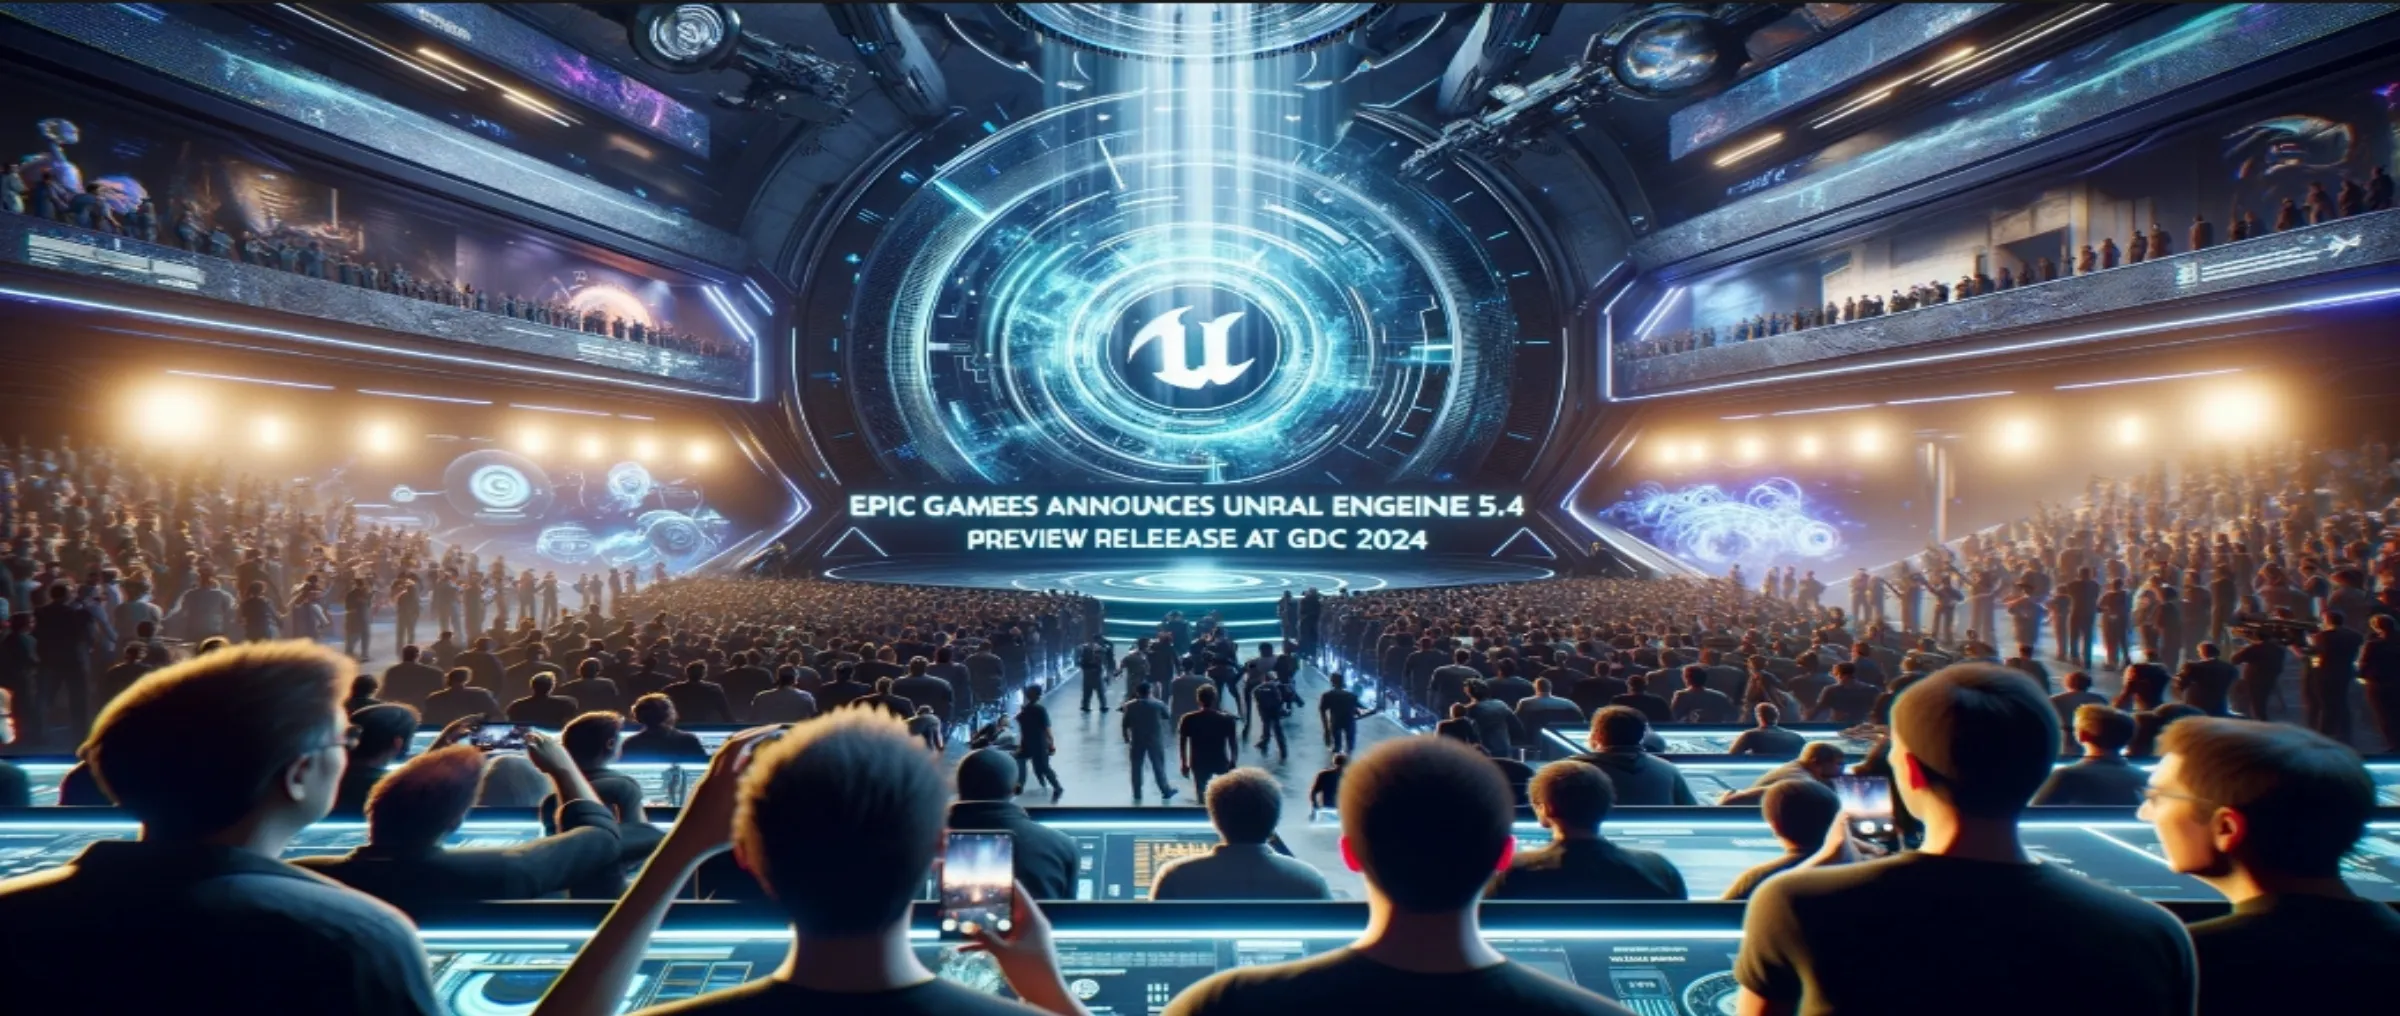 Epic Games Announces Pre-Release of 1 Unreal Engine 5.4 at GDC 2024